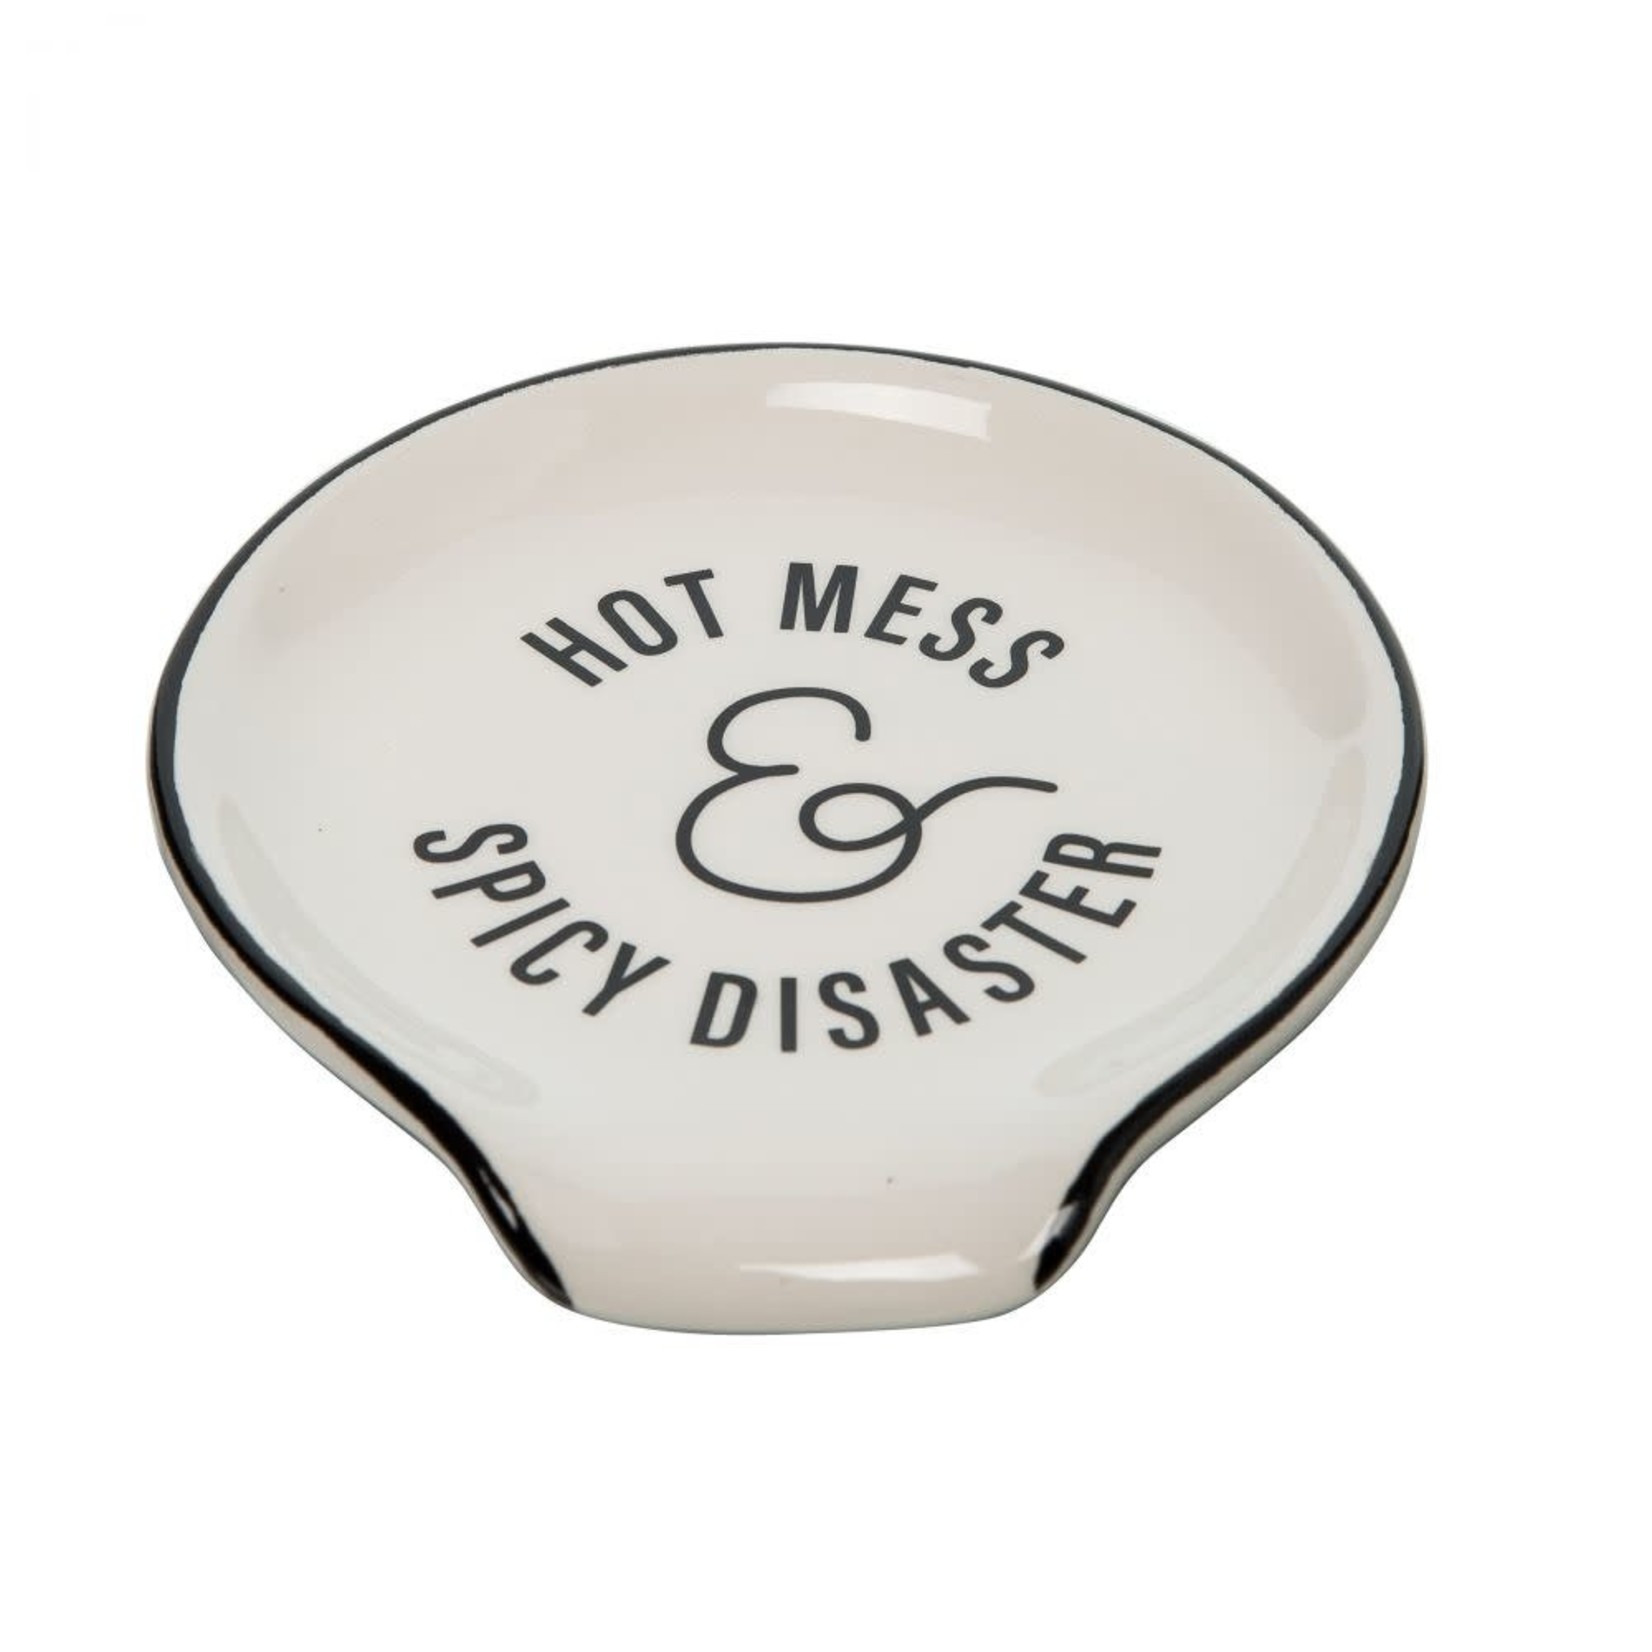 Totalee Hot Mess & Spicy Disaster Ceramic Spoon Rest